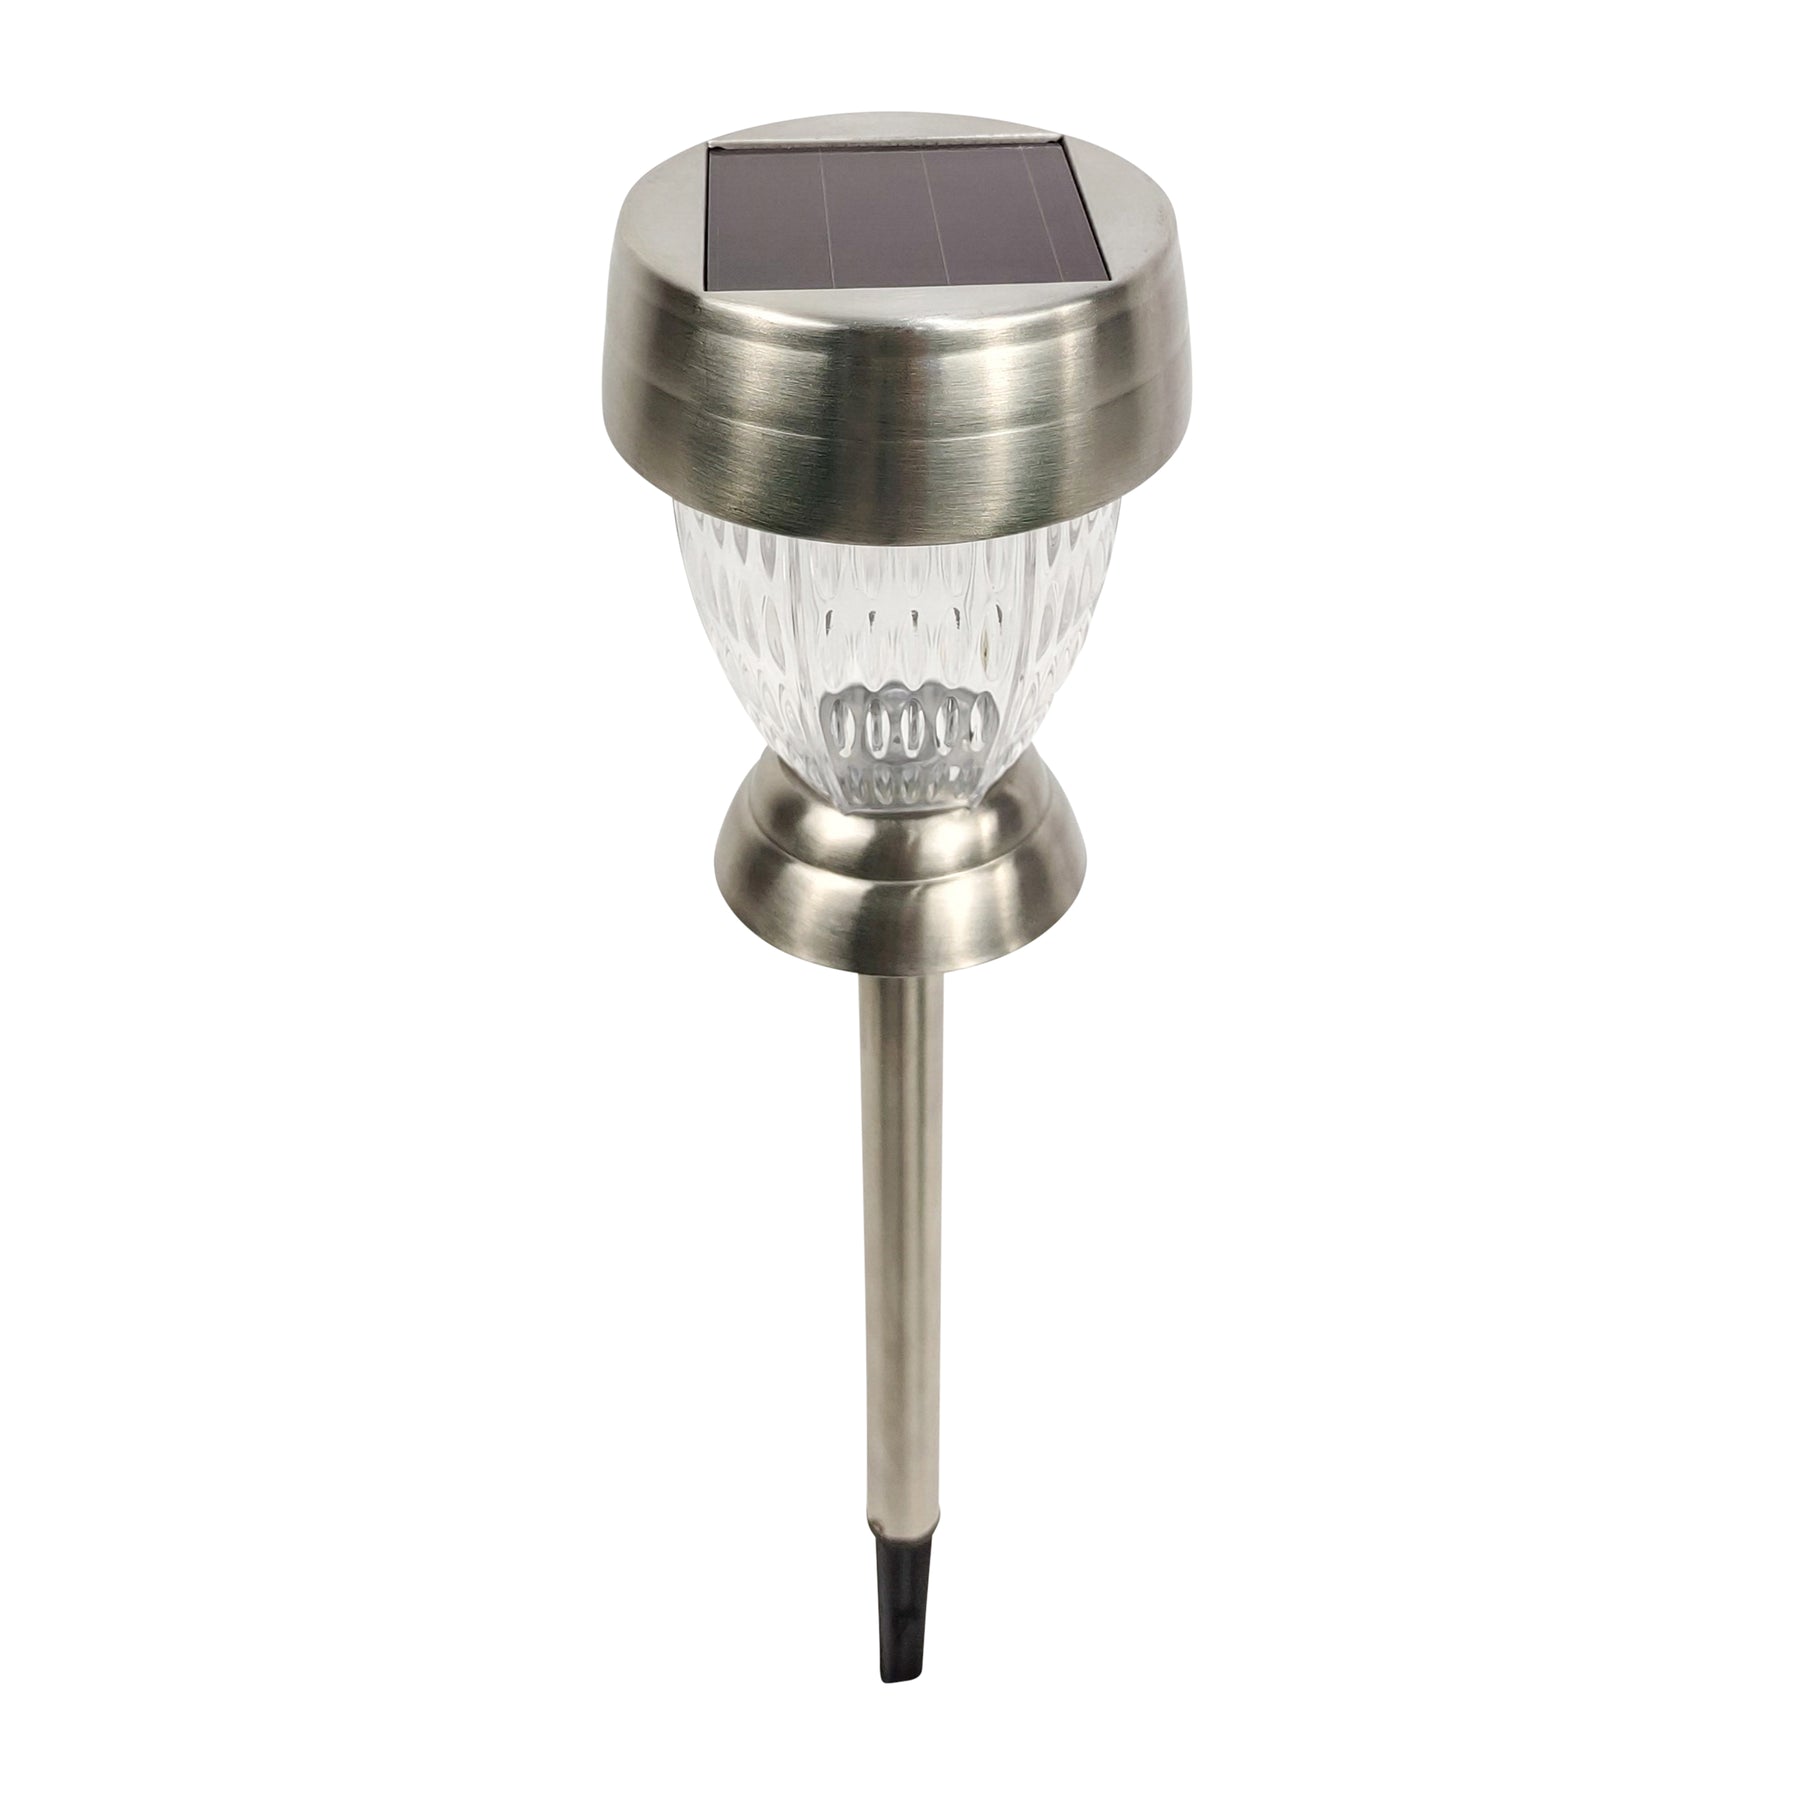 Top-angled view of the Bliss Outdoors 14-inch Tall Stainless Steel Solar Powered LED Pathway Light with a diamond pattern design showing the solar panel on top.